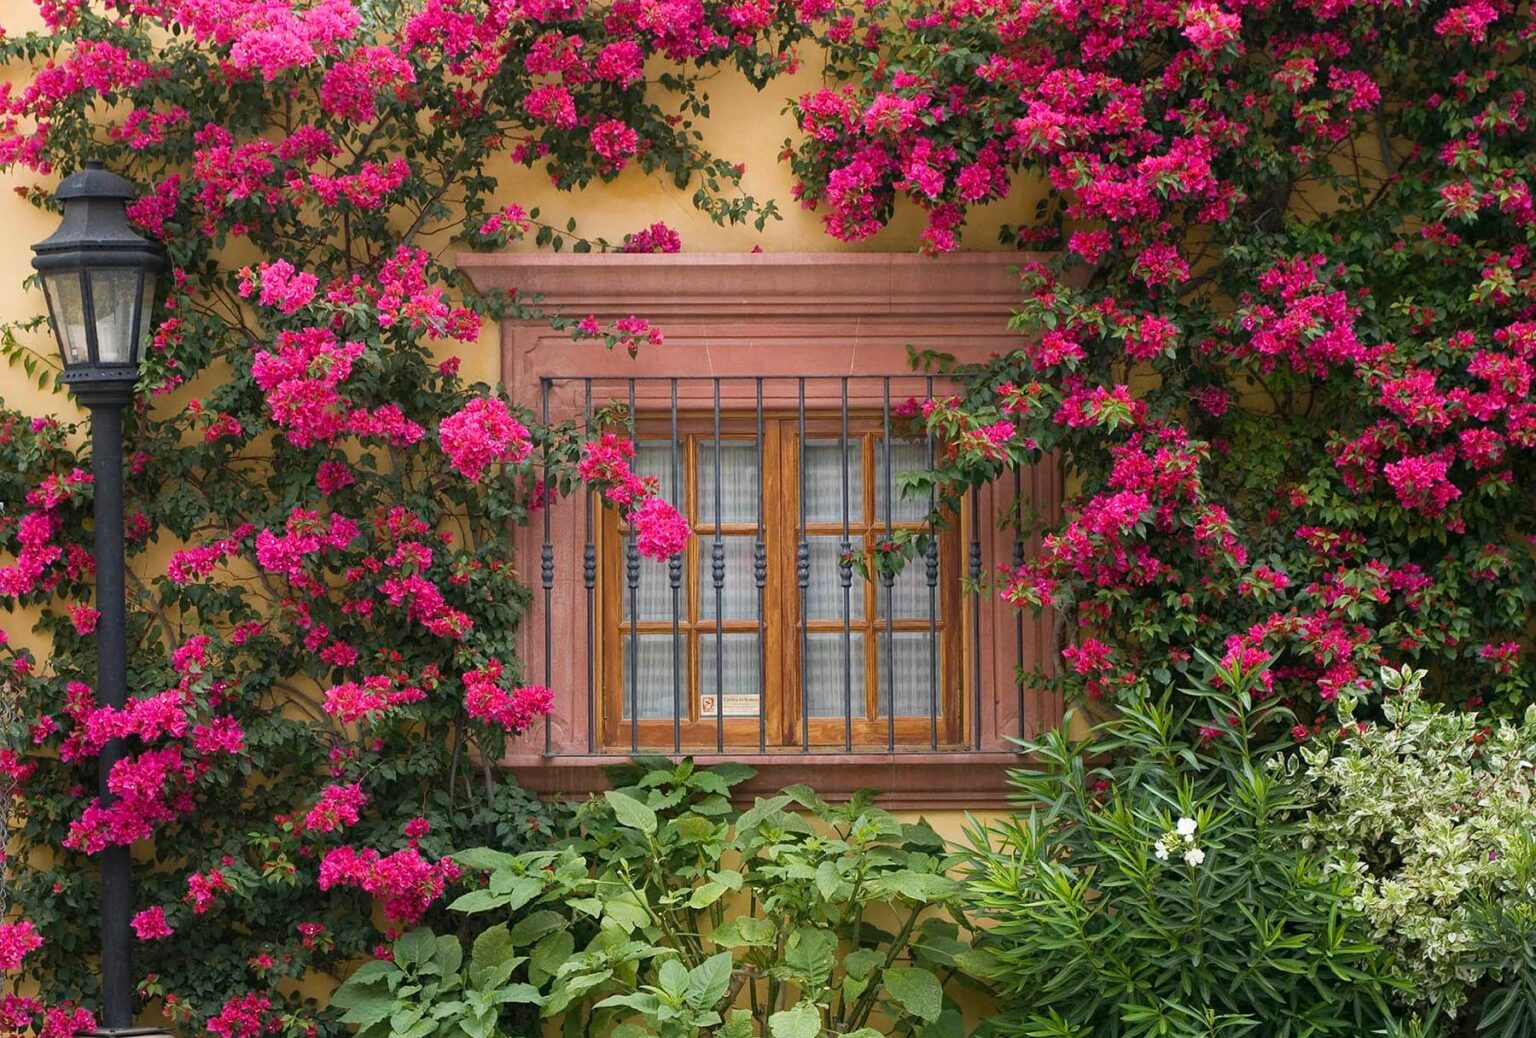 Bougainvillea grows around a window in SAN MIGUEL DE ALLENDE MEXICO.  - Architecture photography by Eagle Visions Photography